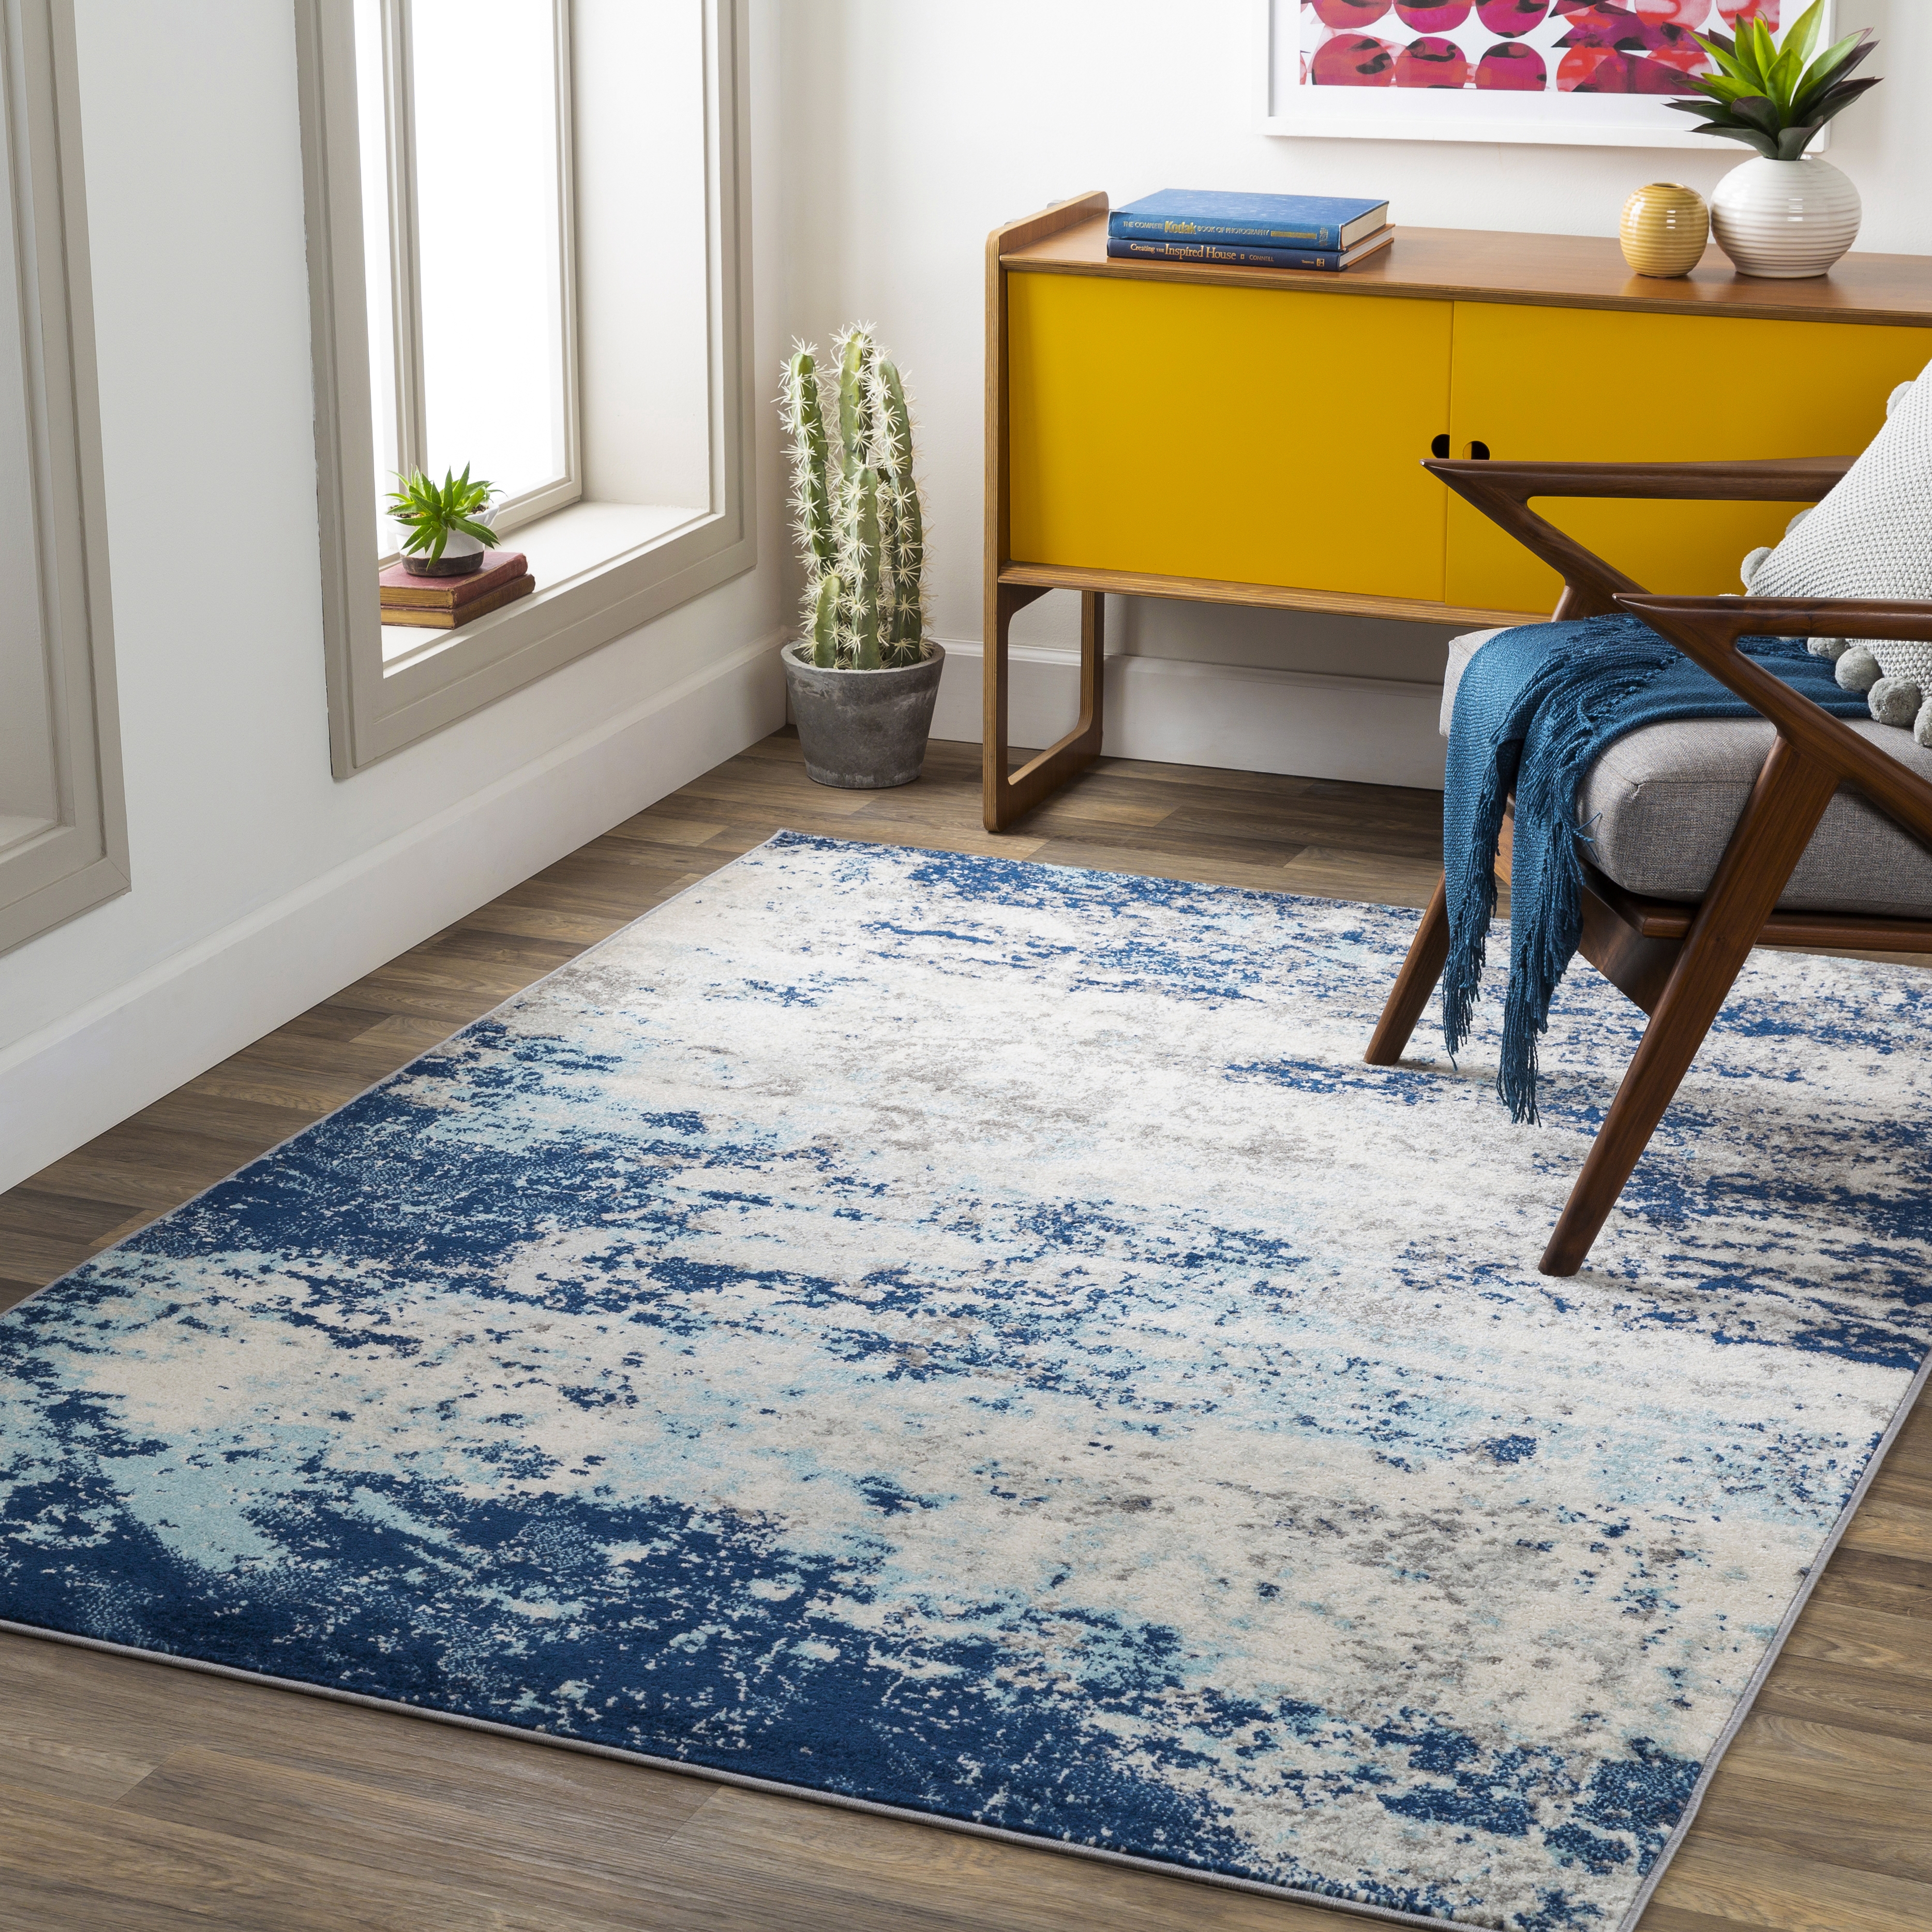 Chester Rug, 7'10" x 10'2" - Image 1